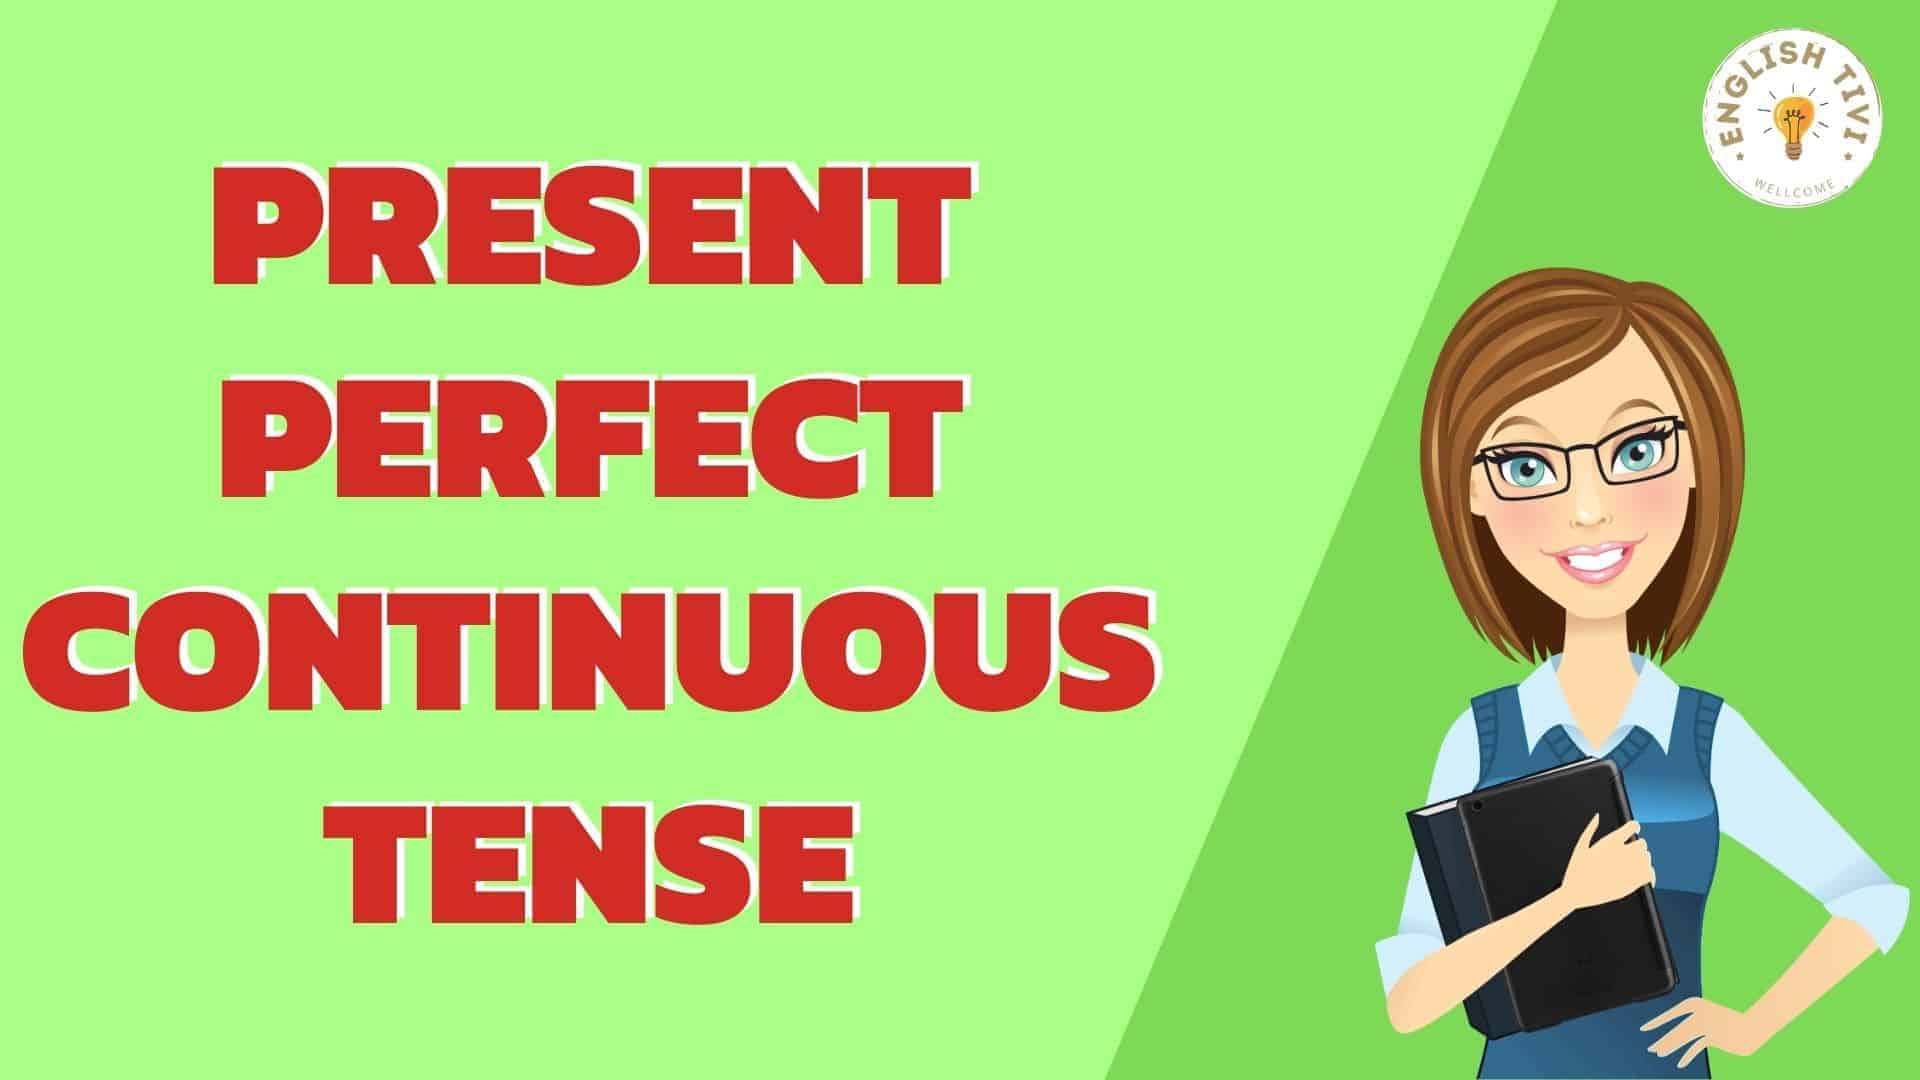 Rewrite The Sentence In Present Perfect Continuous Tense